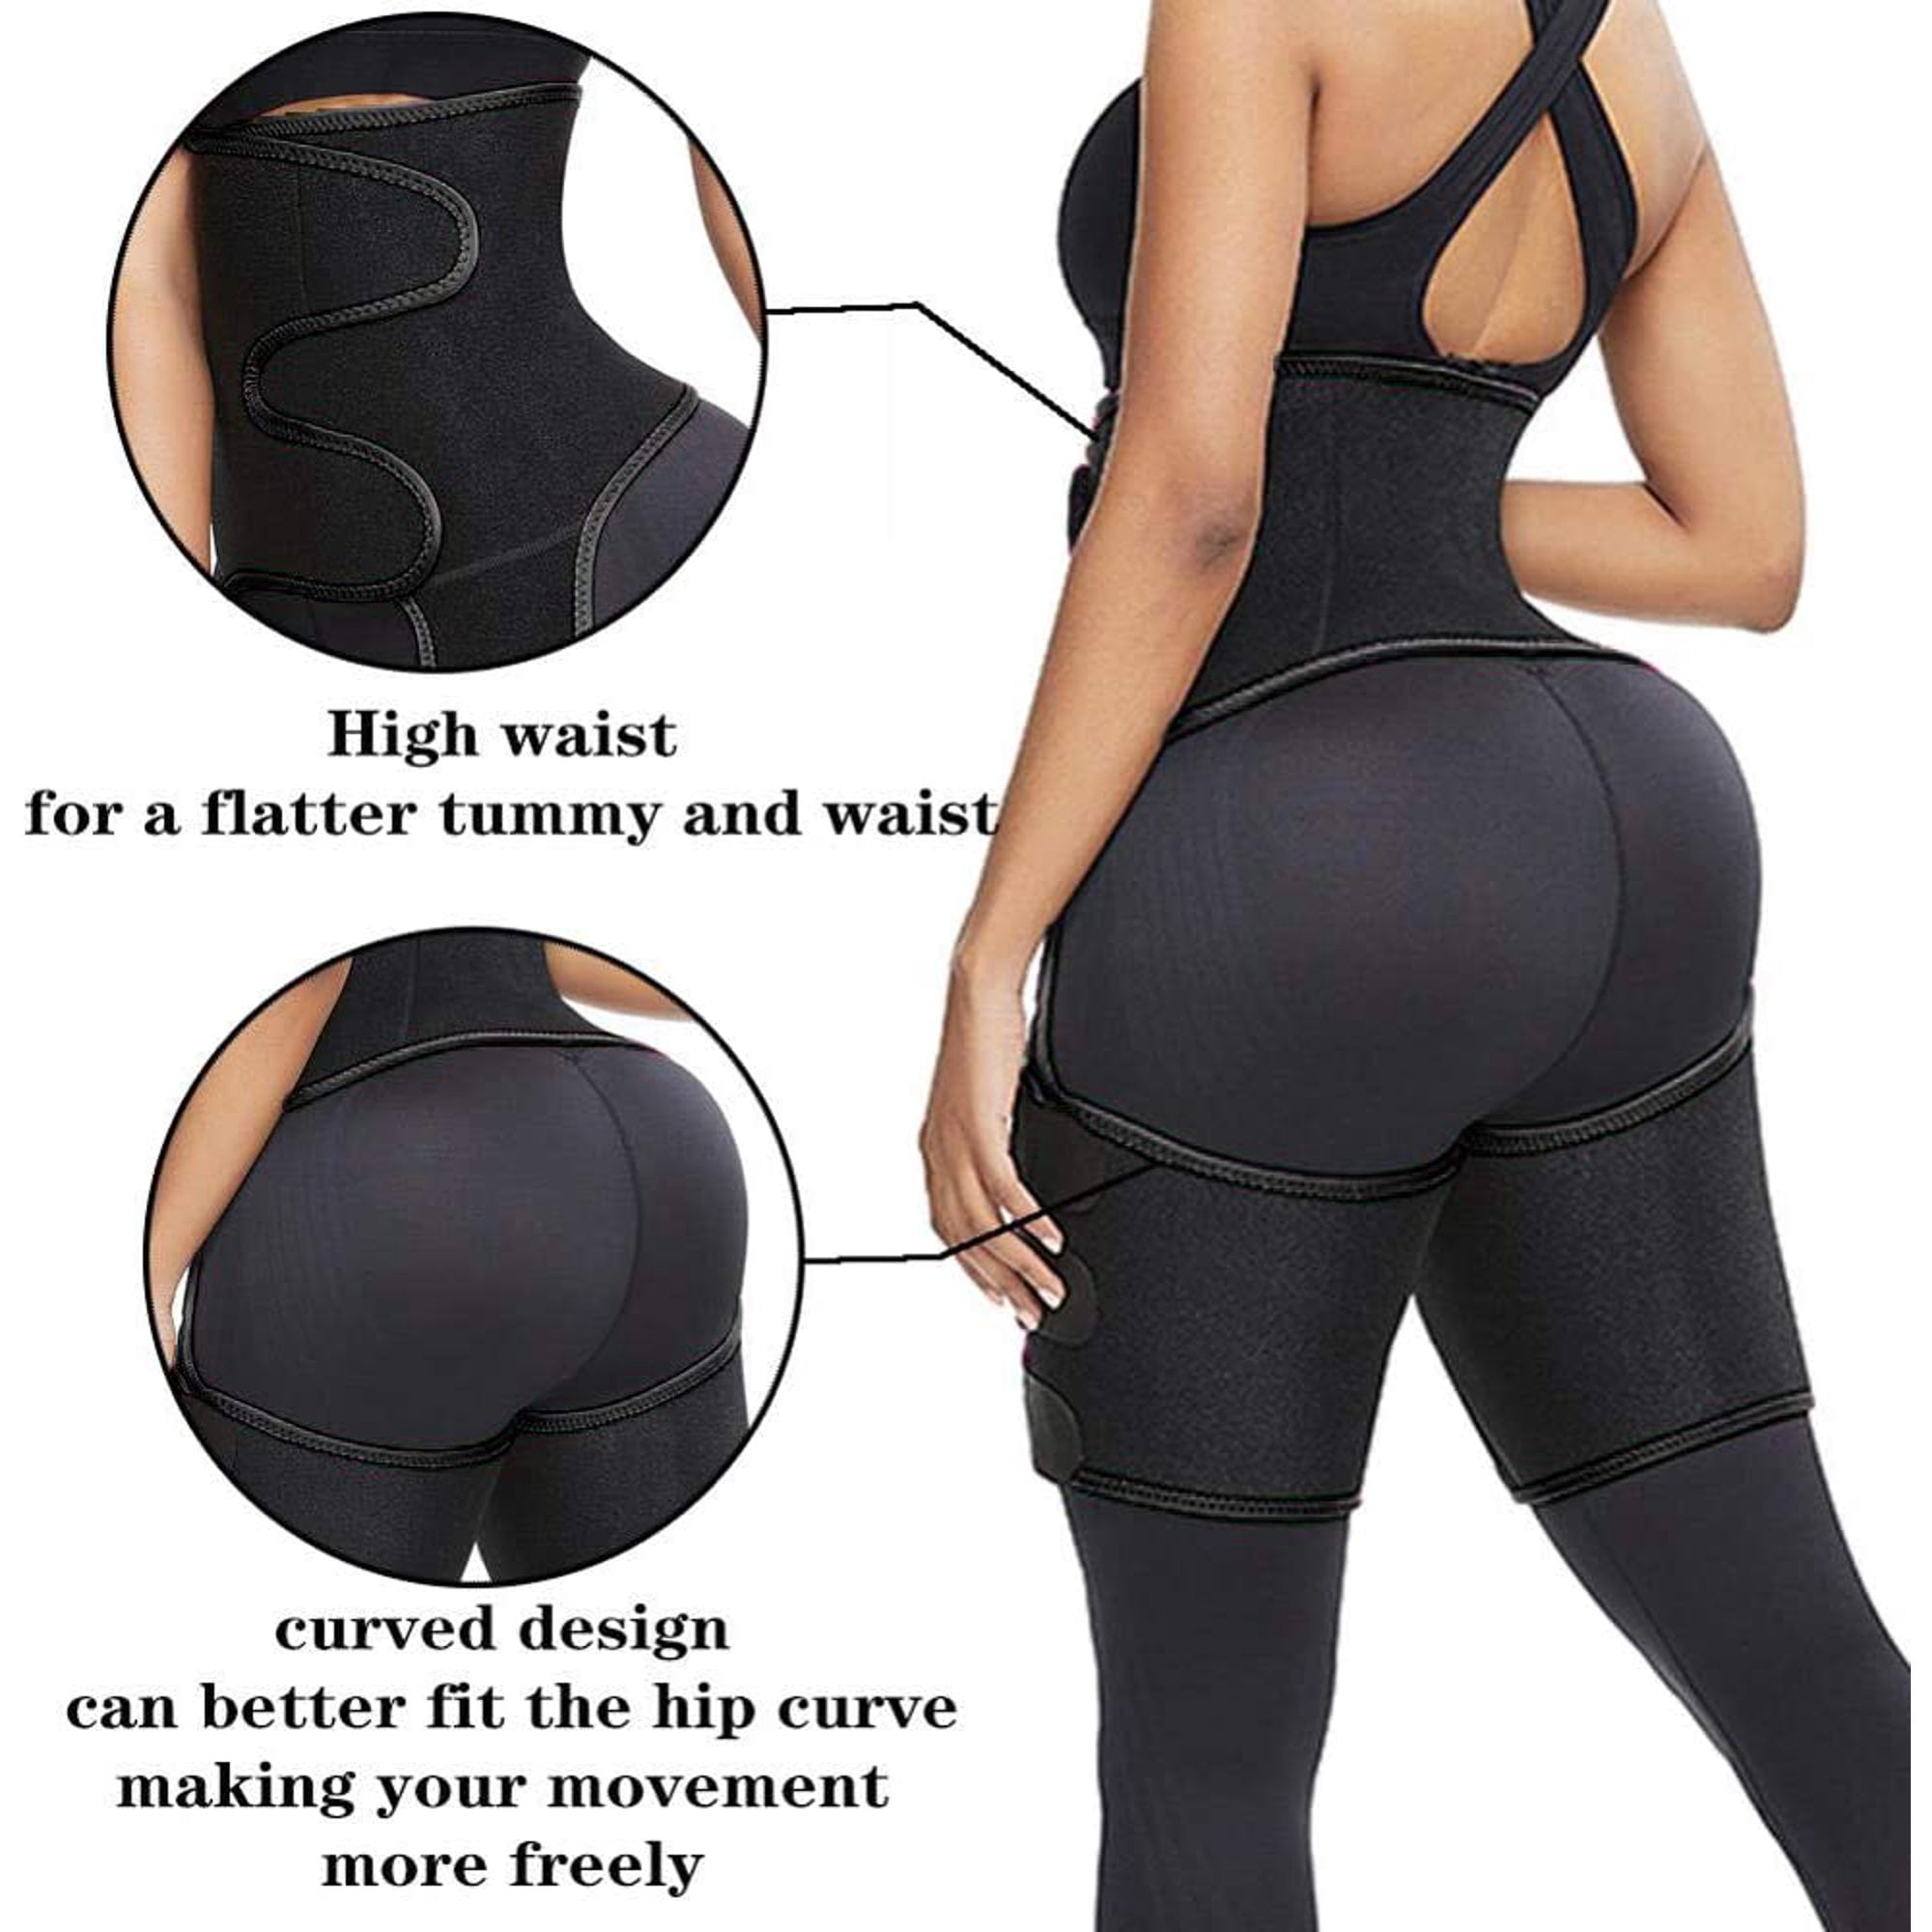 3 in 1 Slimming Support Belt Hip Raise Shapewear Thigh Trimmers Slimming Pants ExerciseM Waist and Thigh Trimmer for Women Weight Loss 